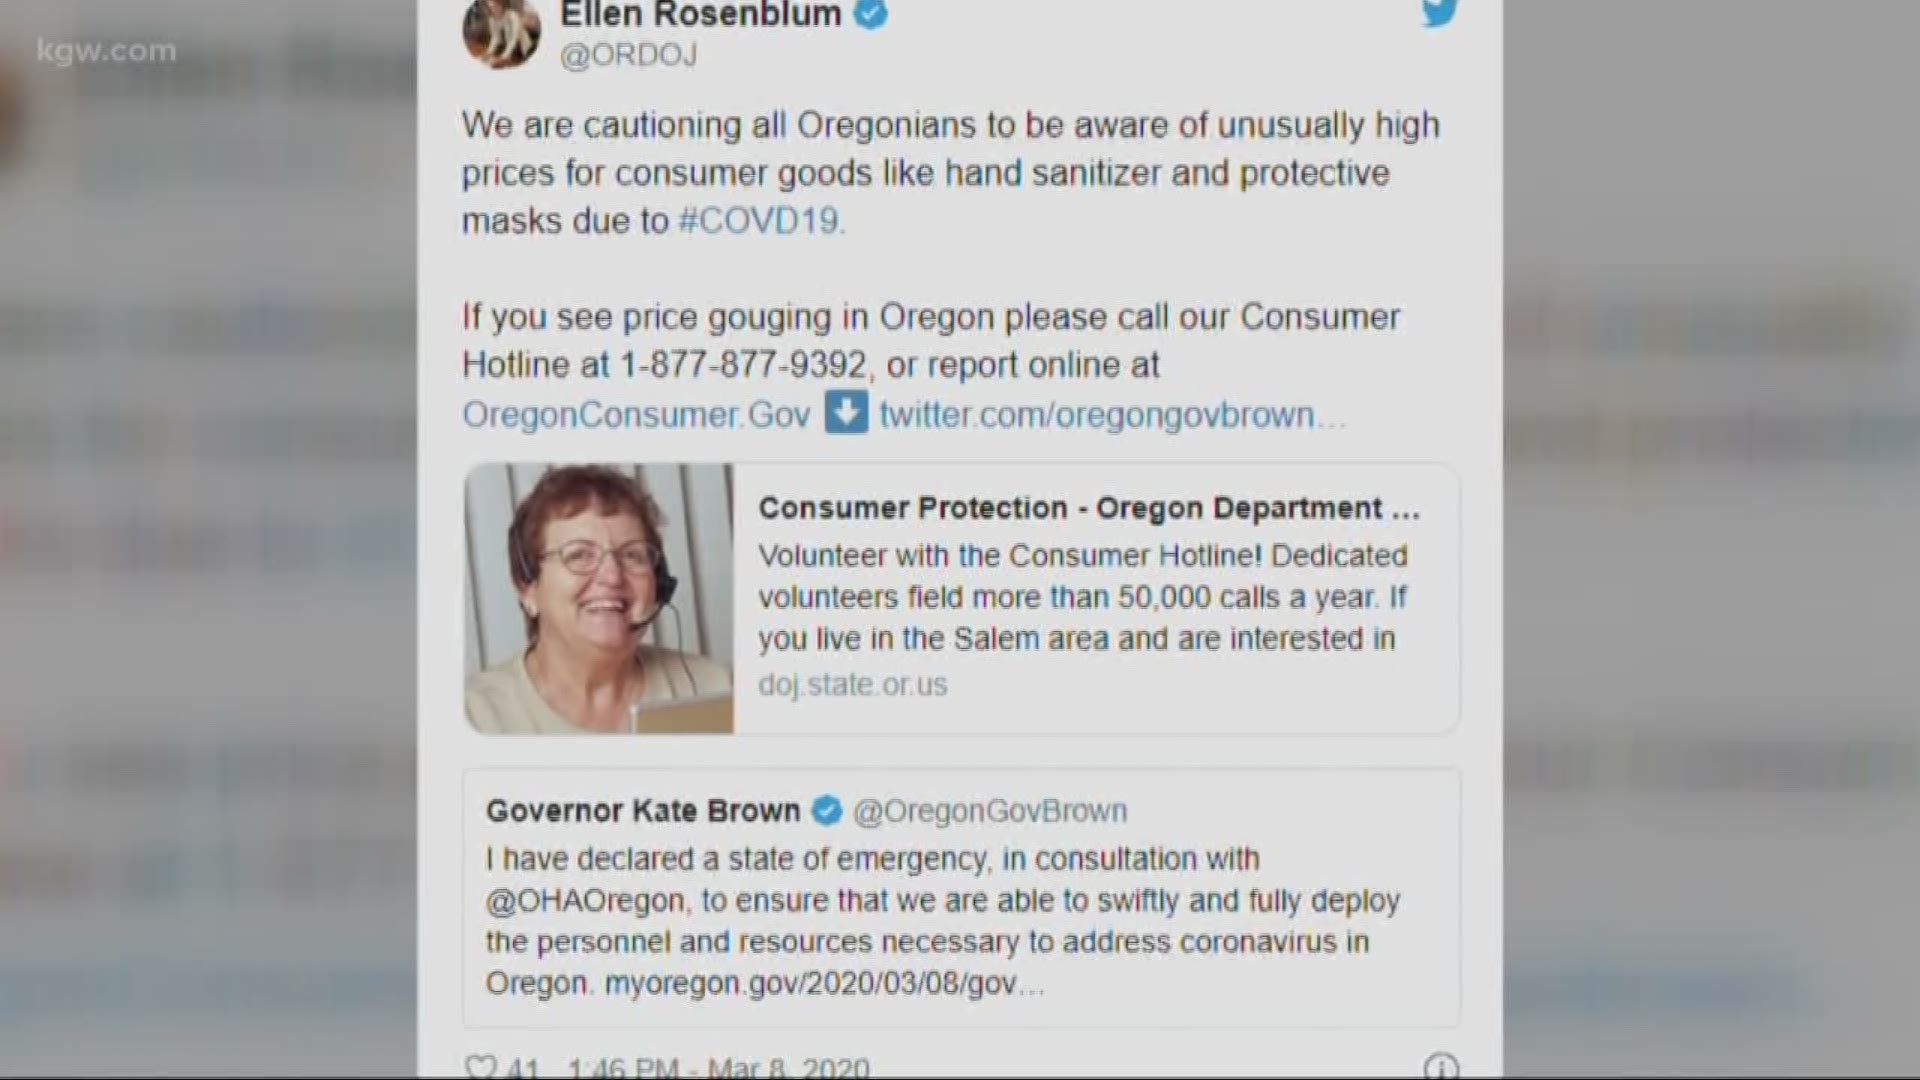 Oregon Attorney General Ellen Rosenblum is warning Oregonians about possible price gouging and is encouraging them to report it if they see it.